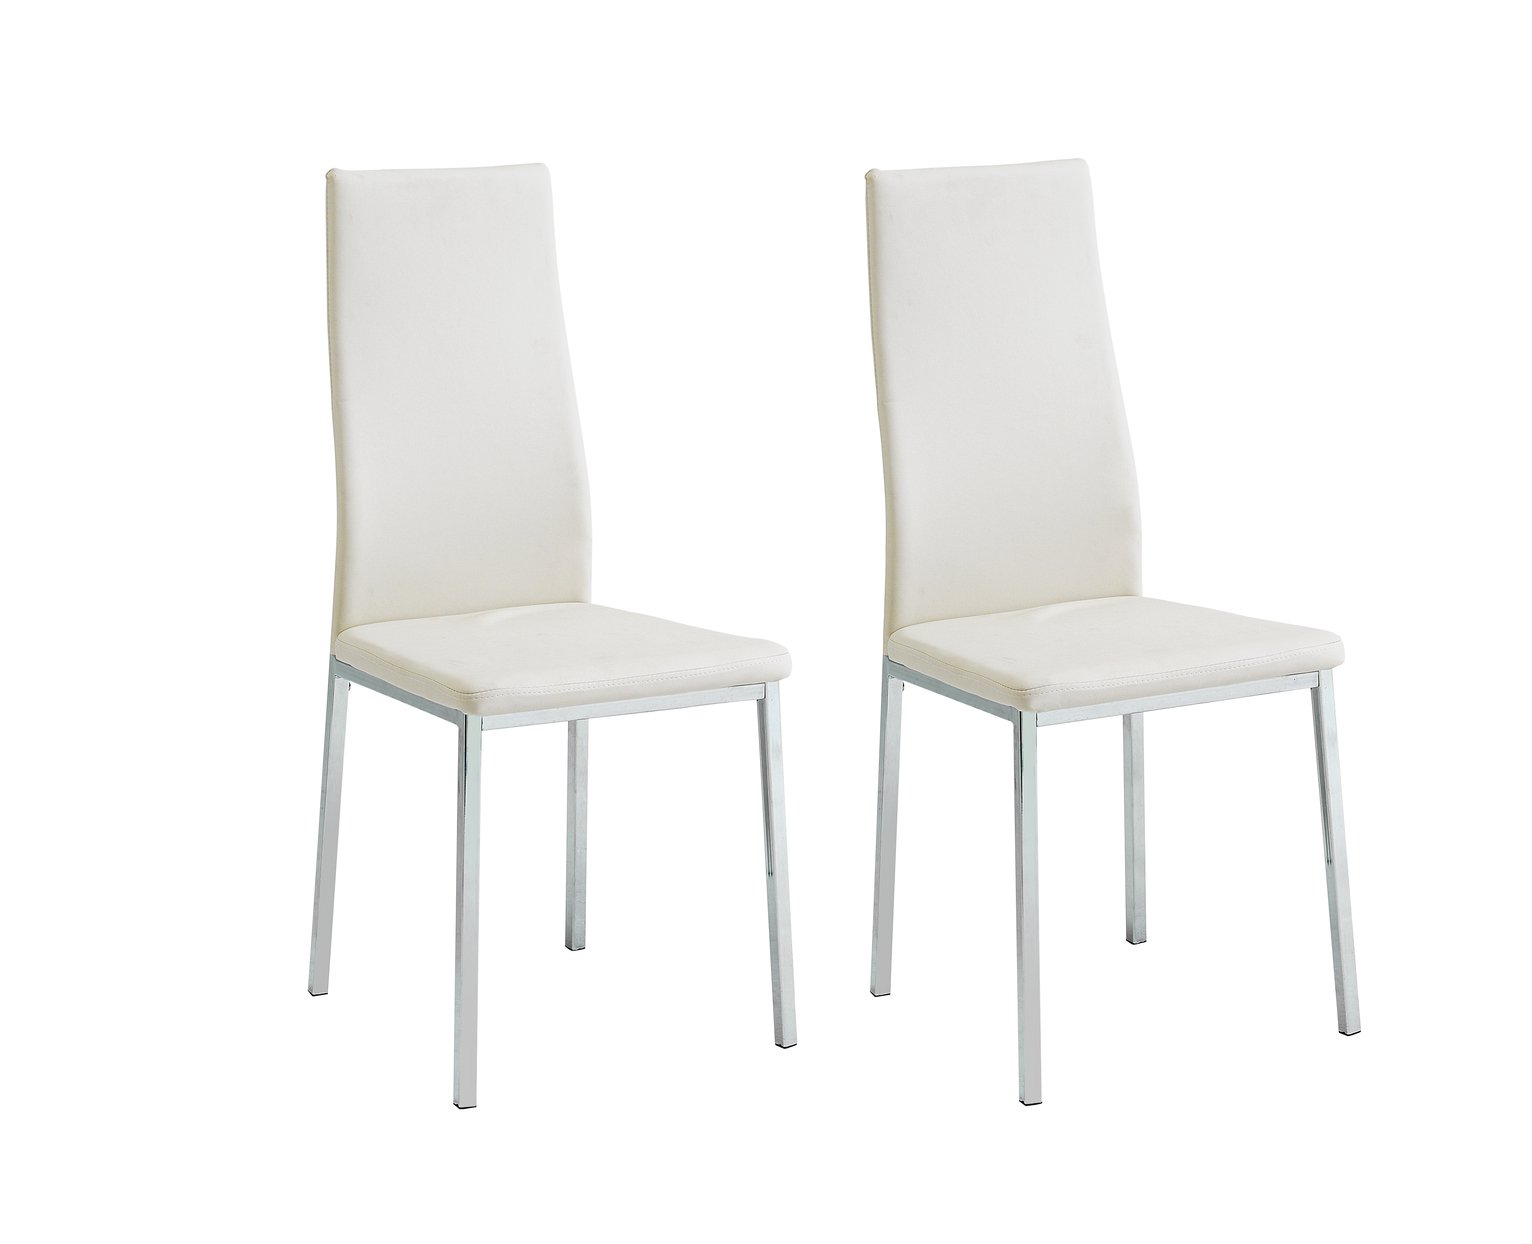 Argos Home Tia Pair of Chrome and White Dining Chairs